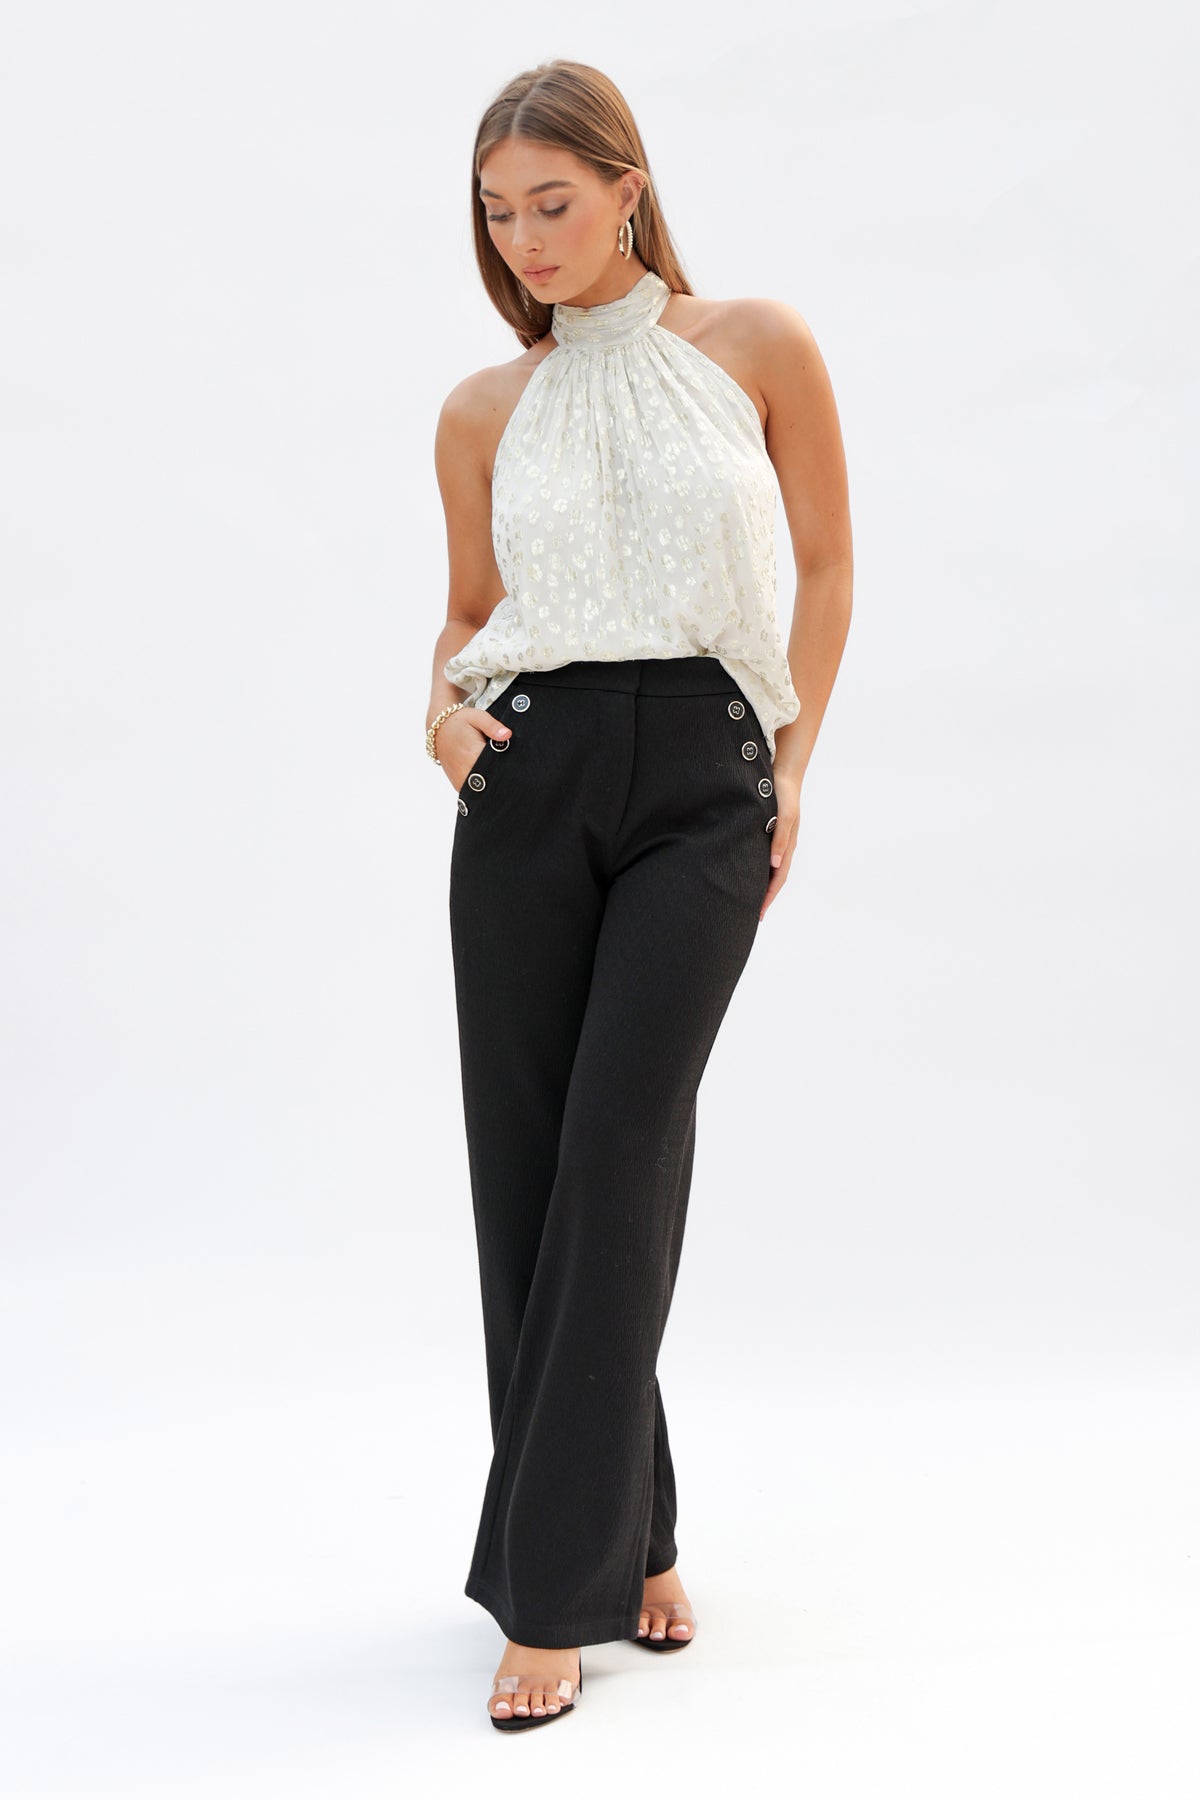 White wide leg pants – Youngberry